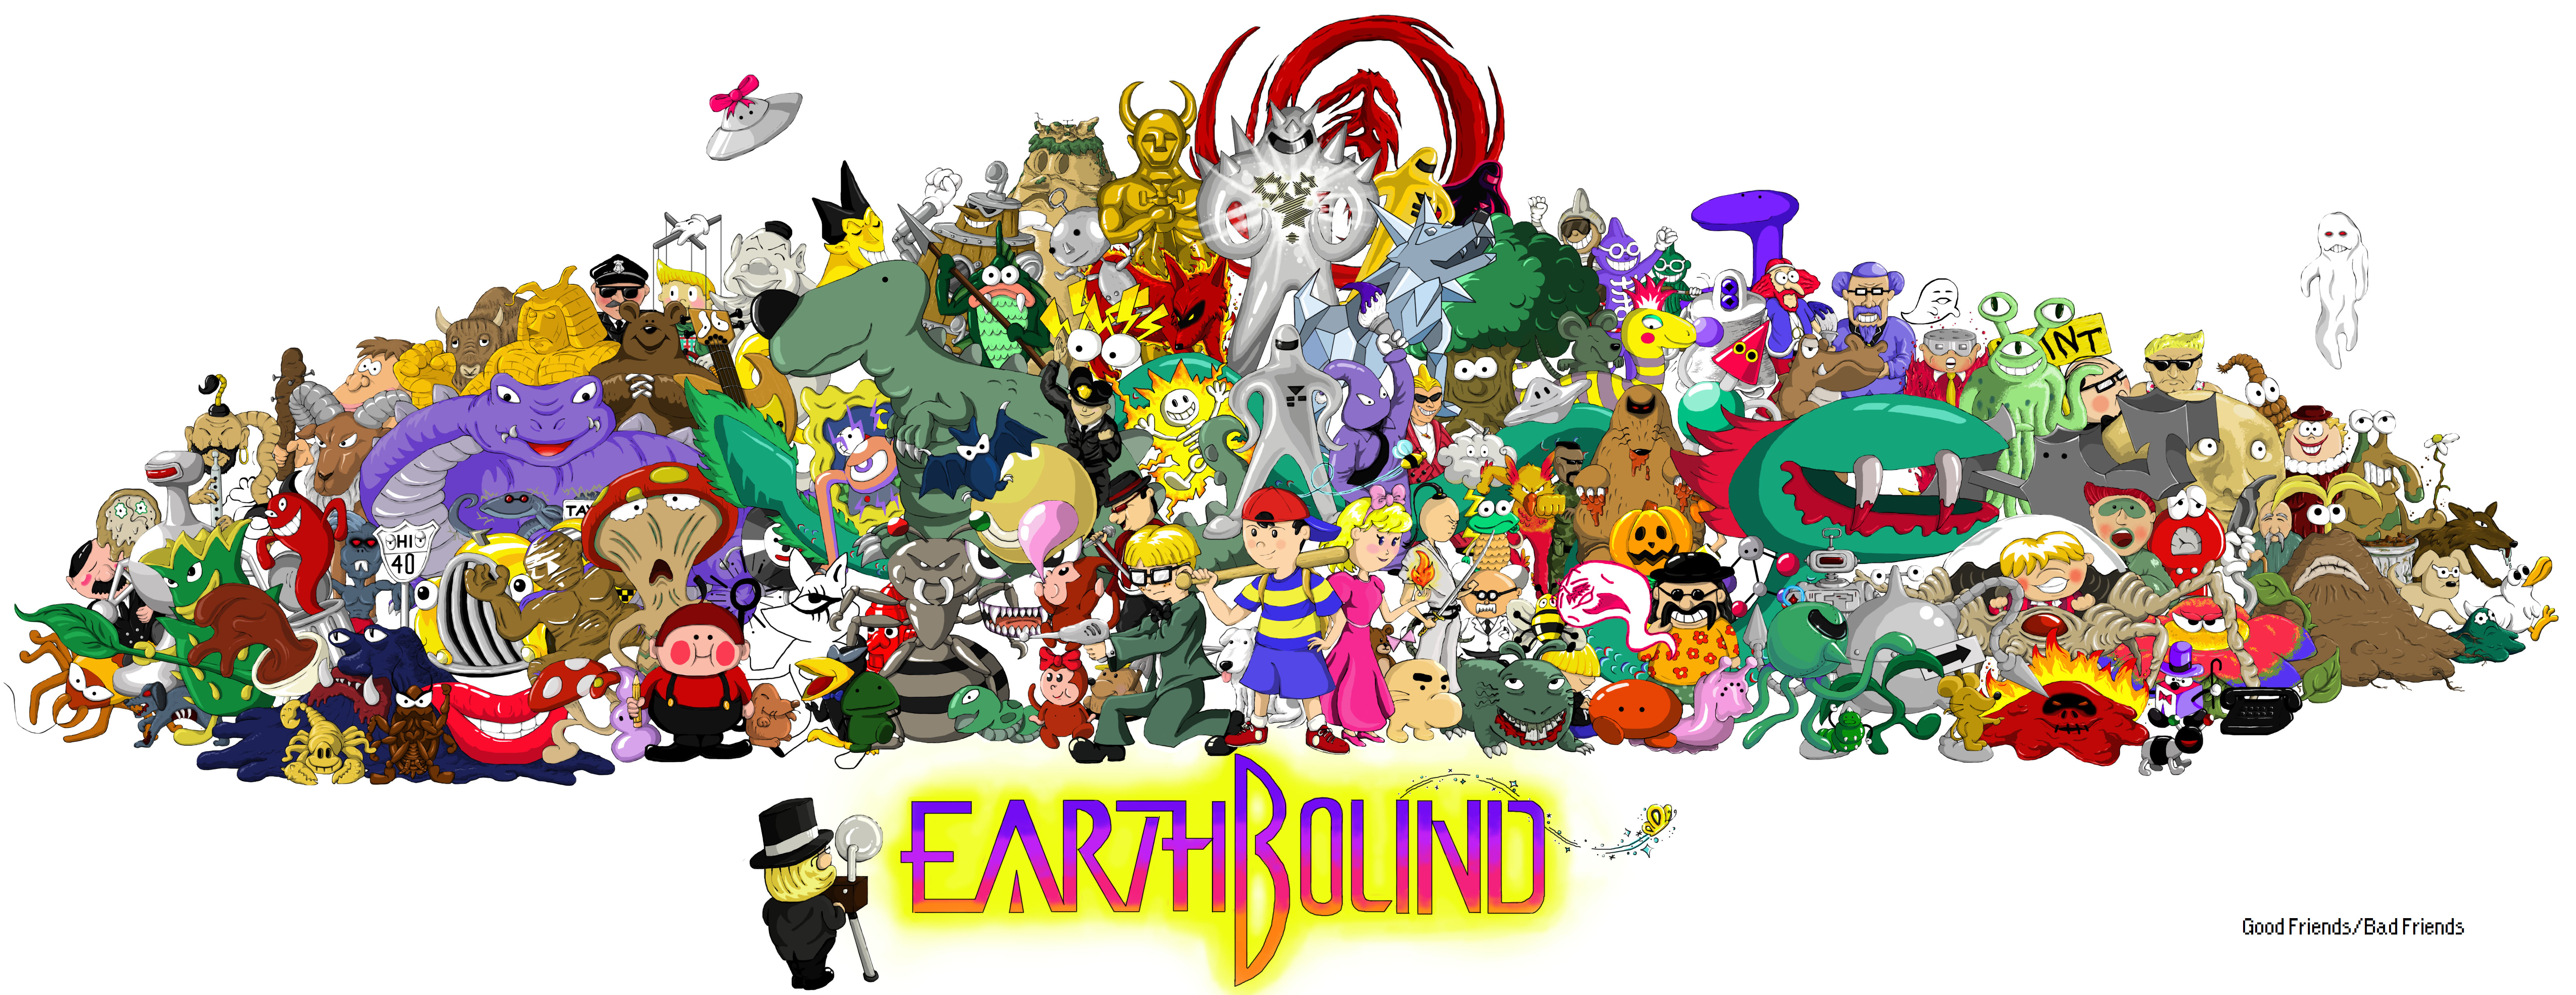 Earthbound #16